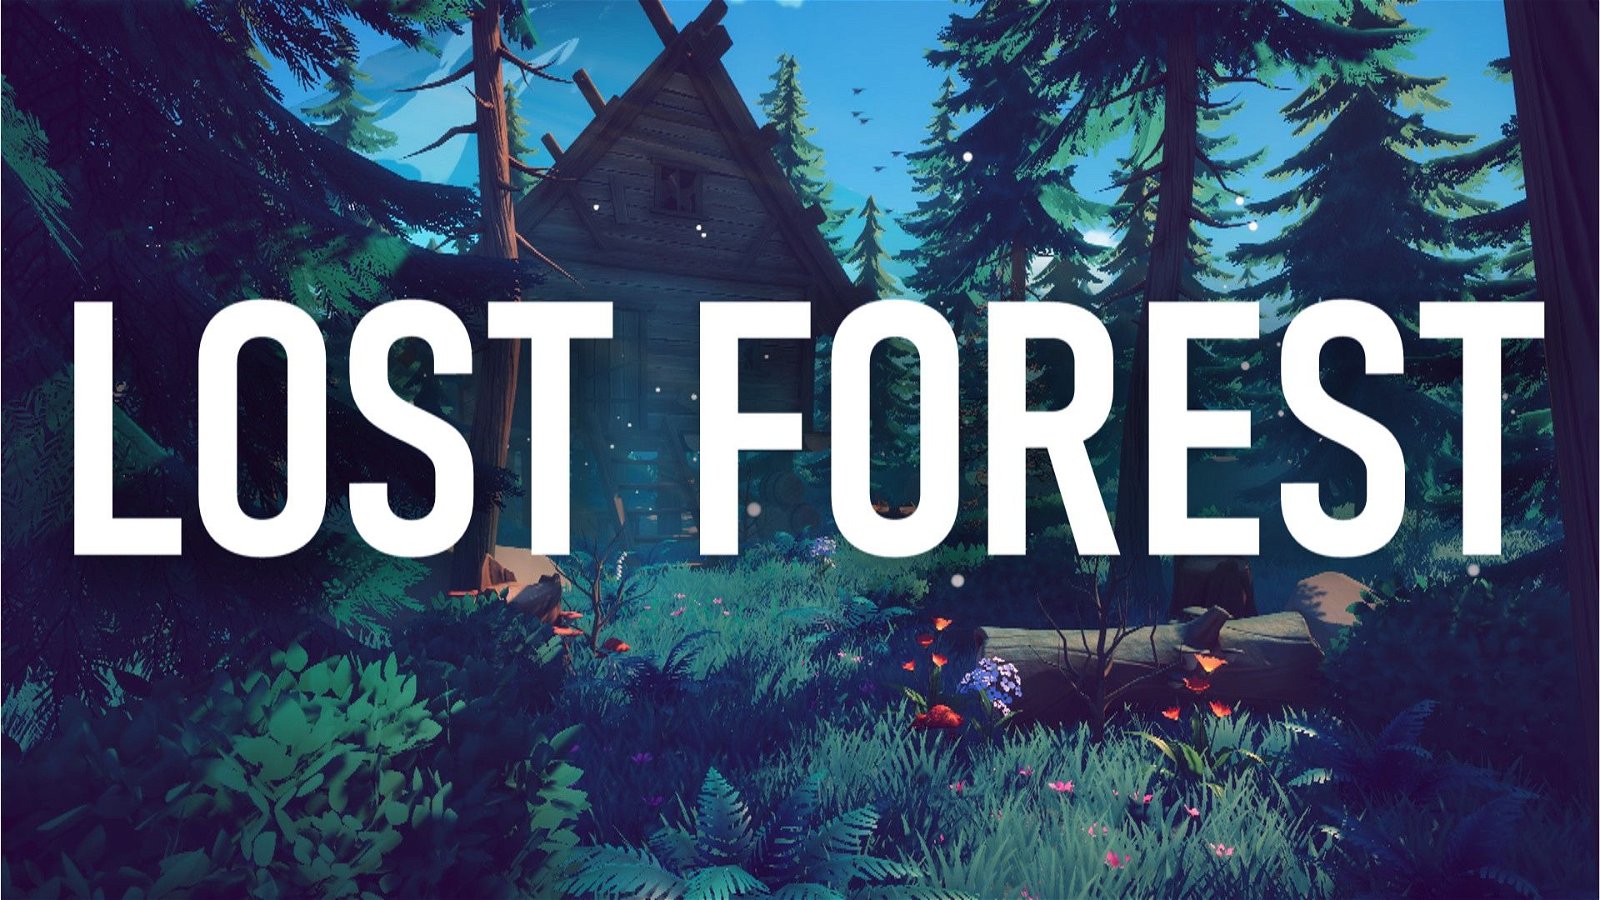 Image of Lost Forest